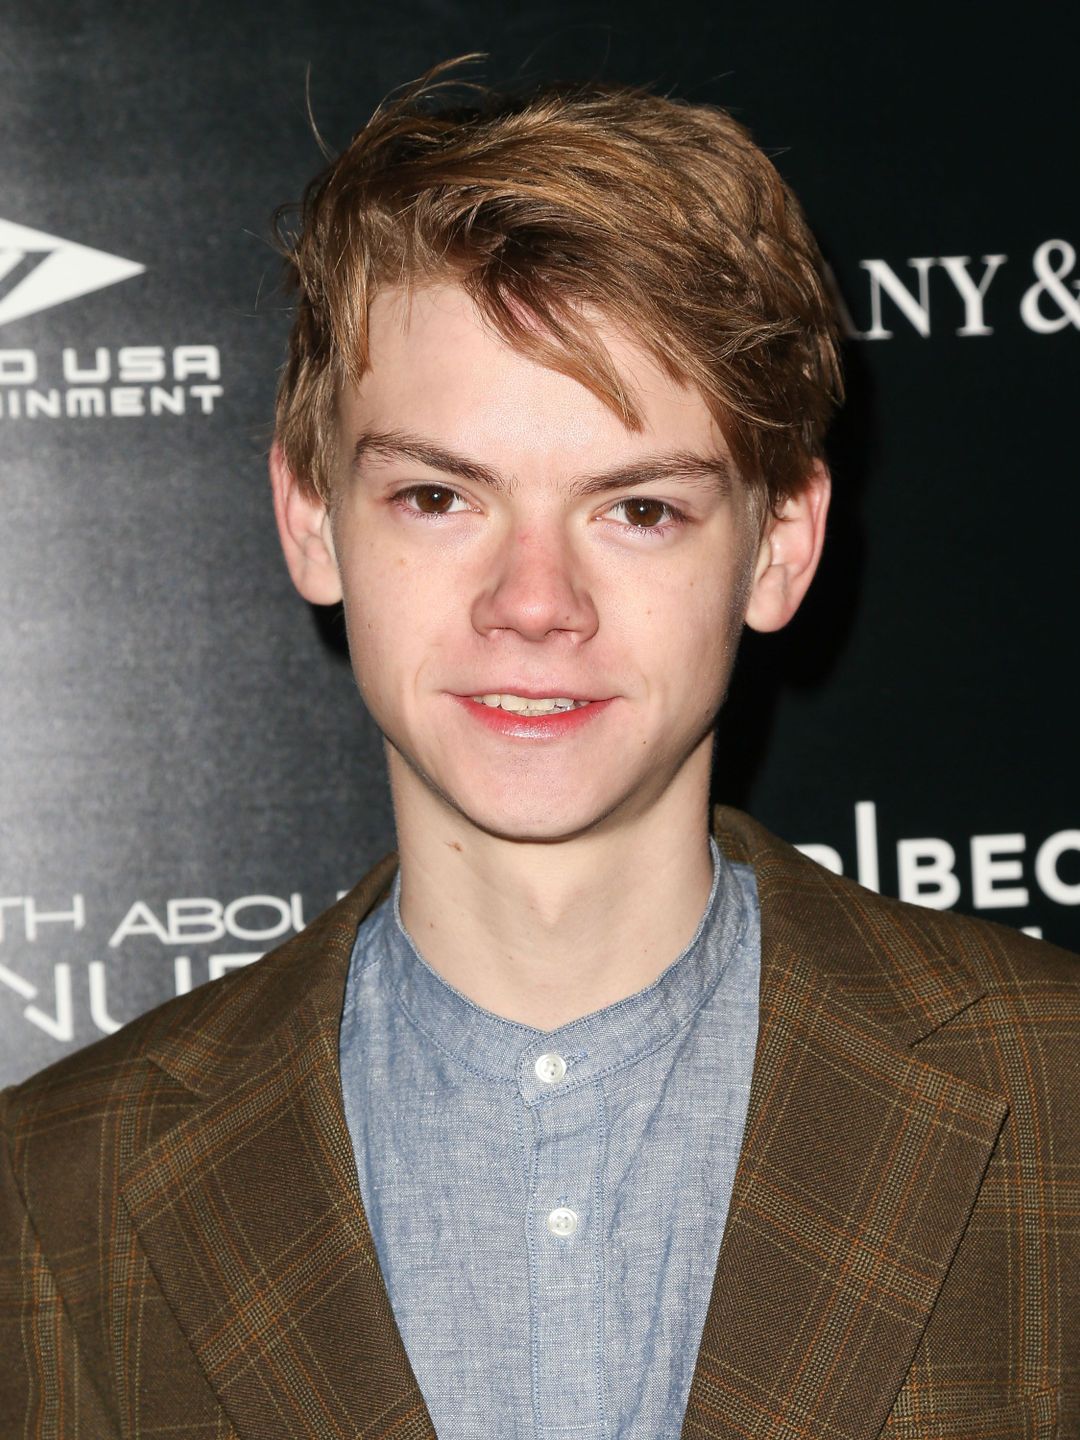 Thomas Sangster in real life